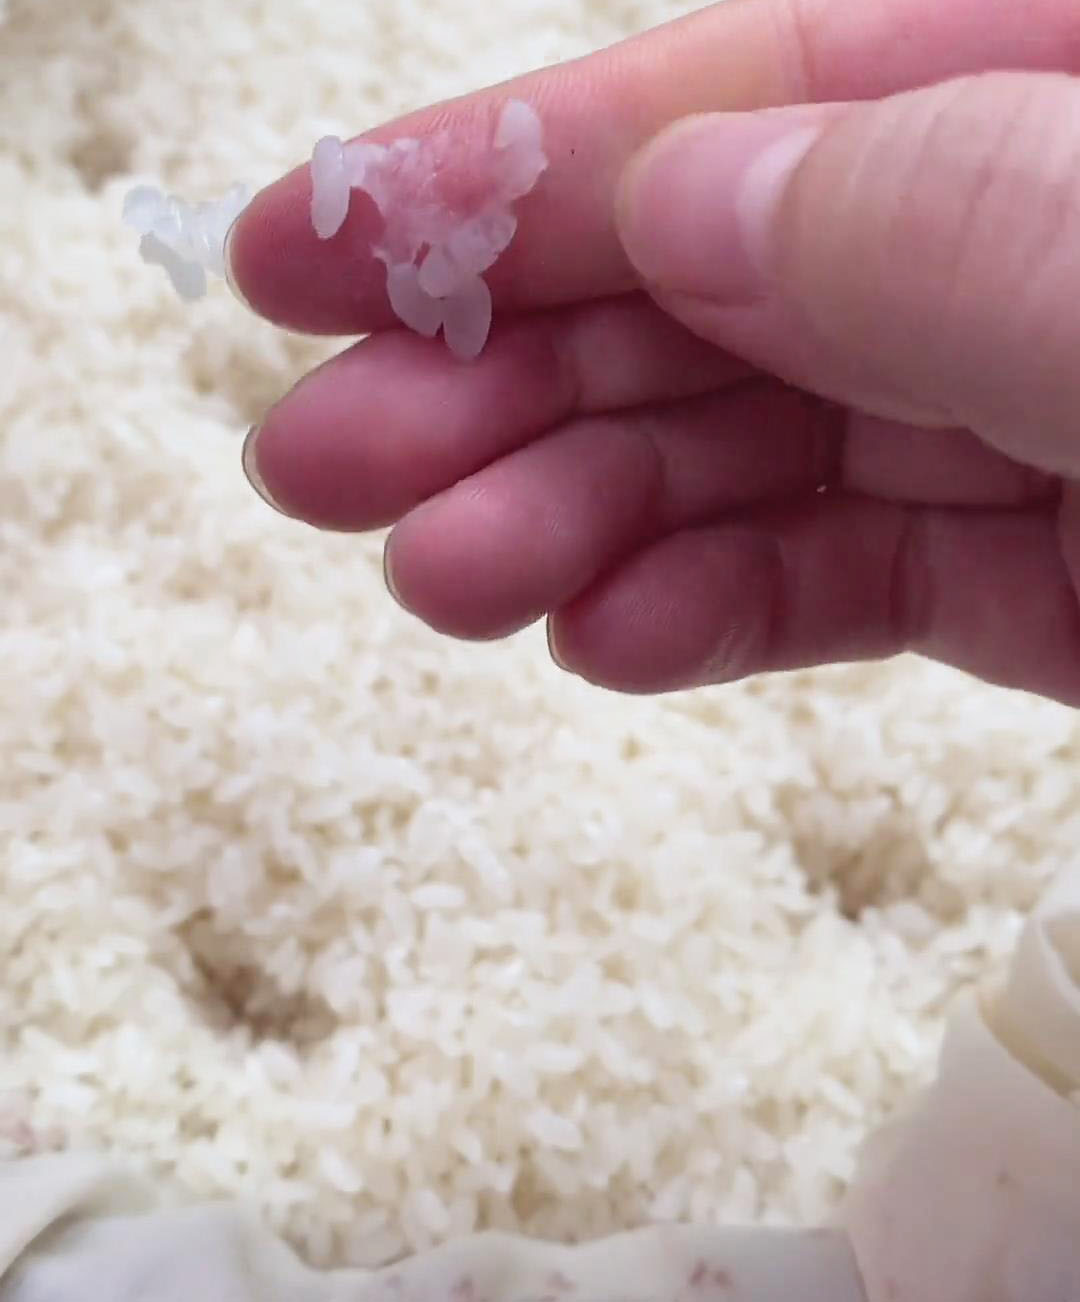 glutinous rice after steaming